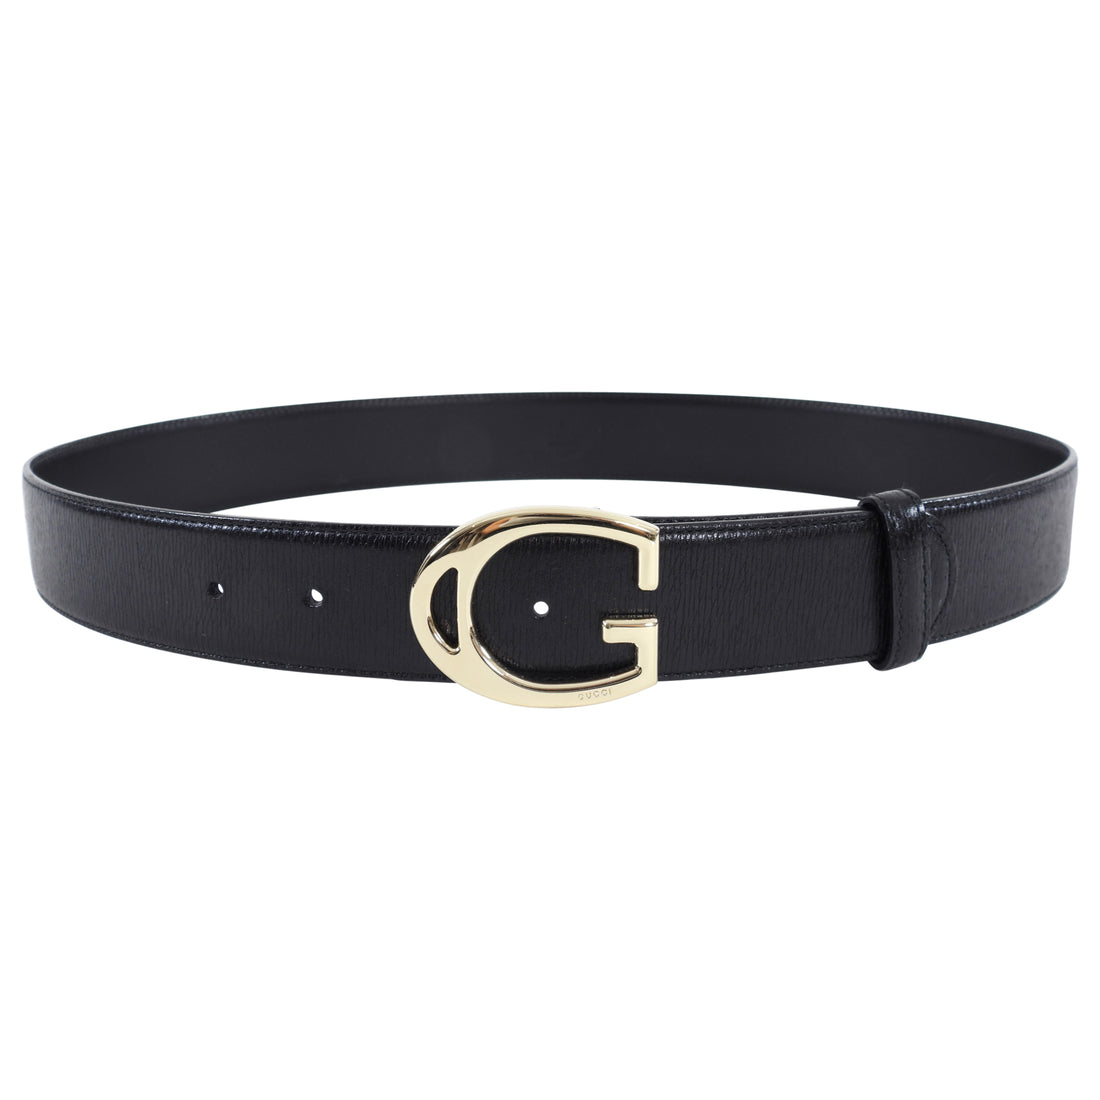 Gucci Black Leather Belt with Goldtone G Buckle - 30-33”